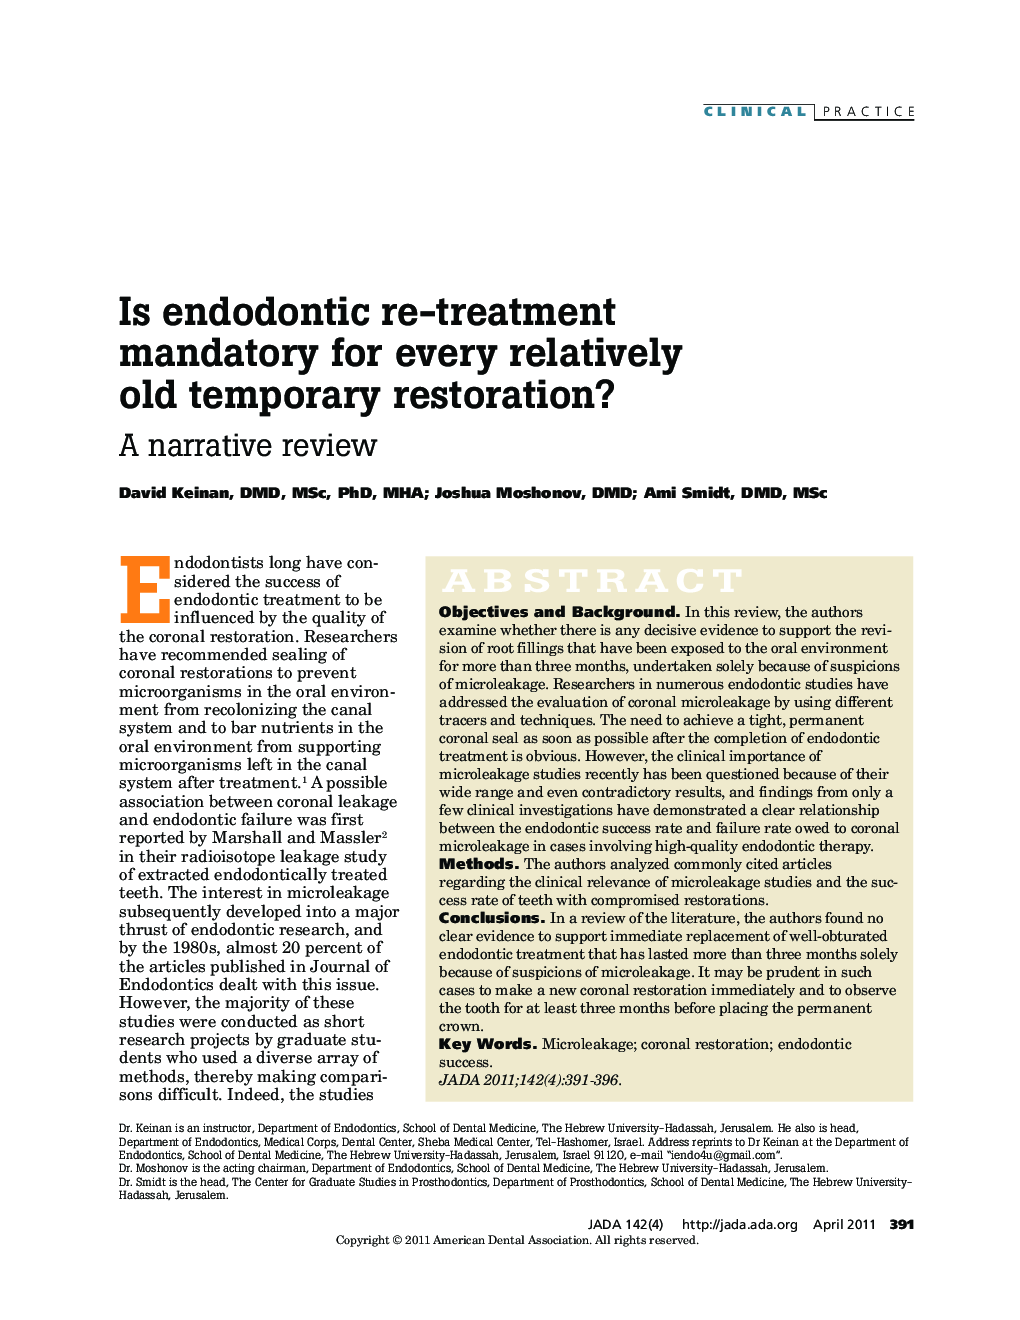 Is endodontic re-treatment mandatory for every relatively old temporary restoration? : A narrative review